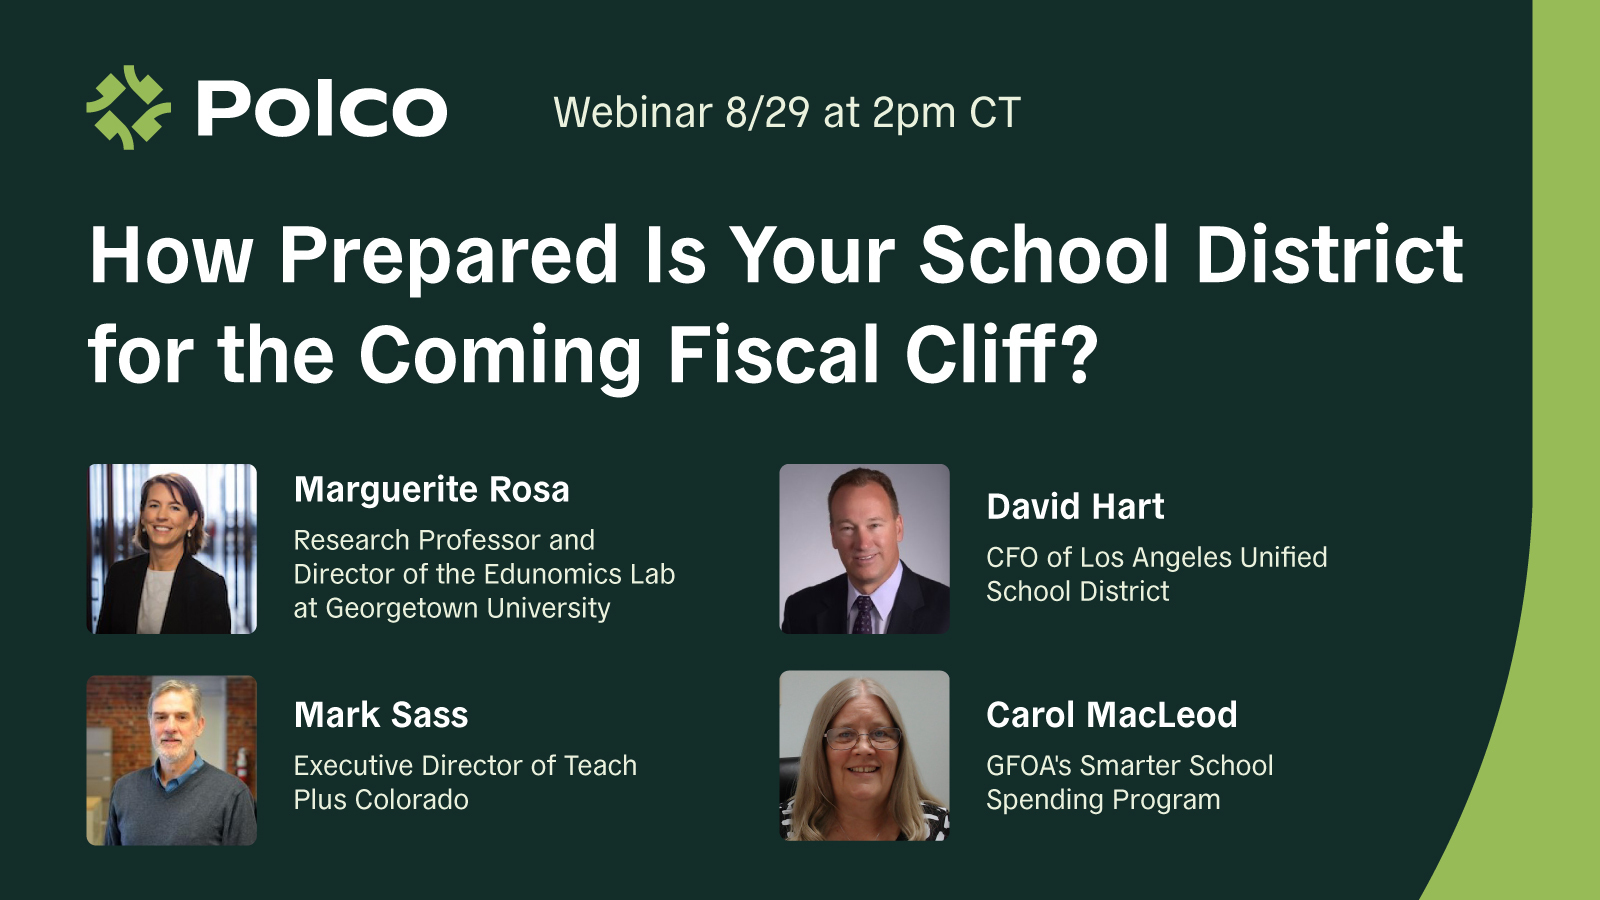 How Prepared Is Your School District for the Coming Fiscal Cliff?